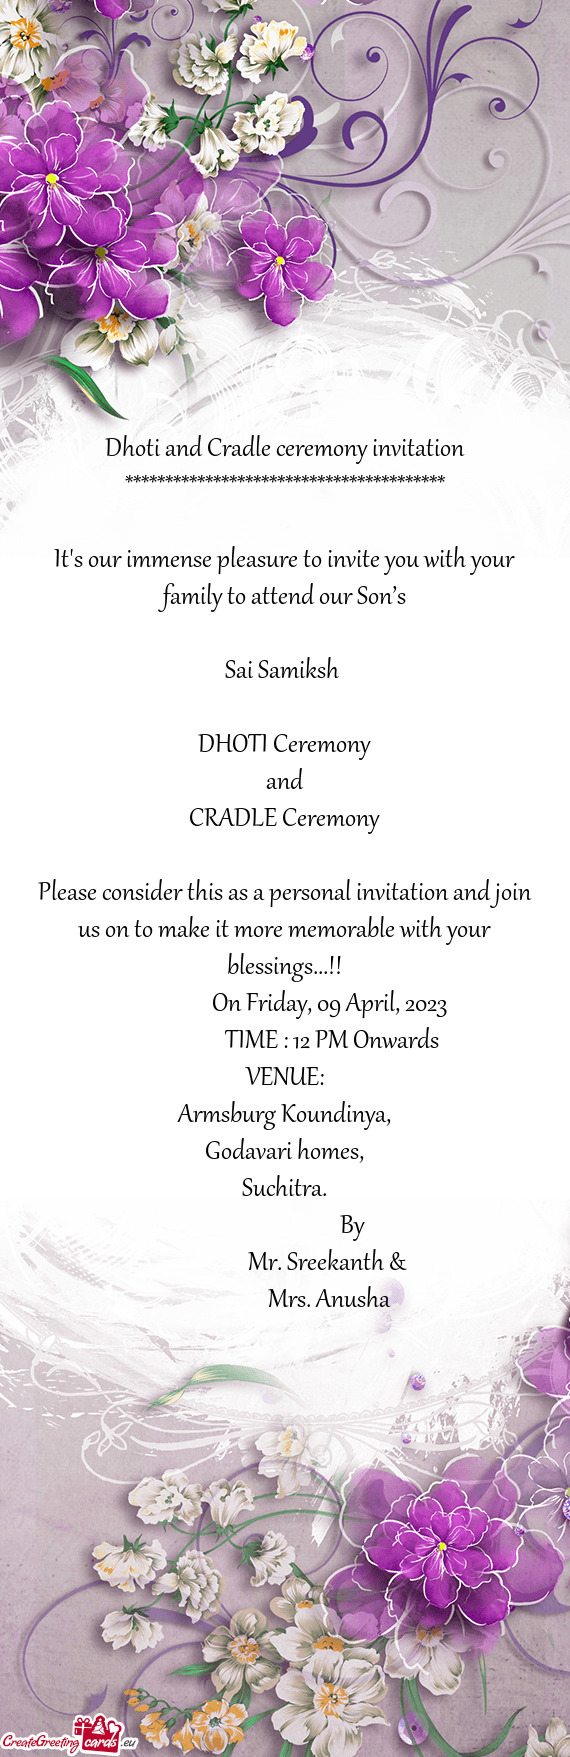 Please consider this as a personal invitation and join us on to make it more memorable with your ble